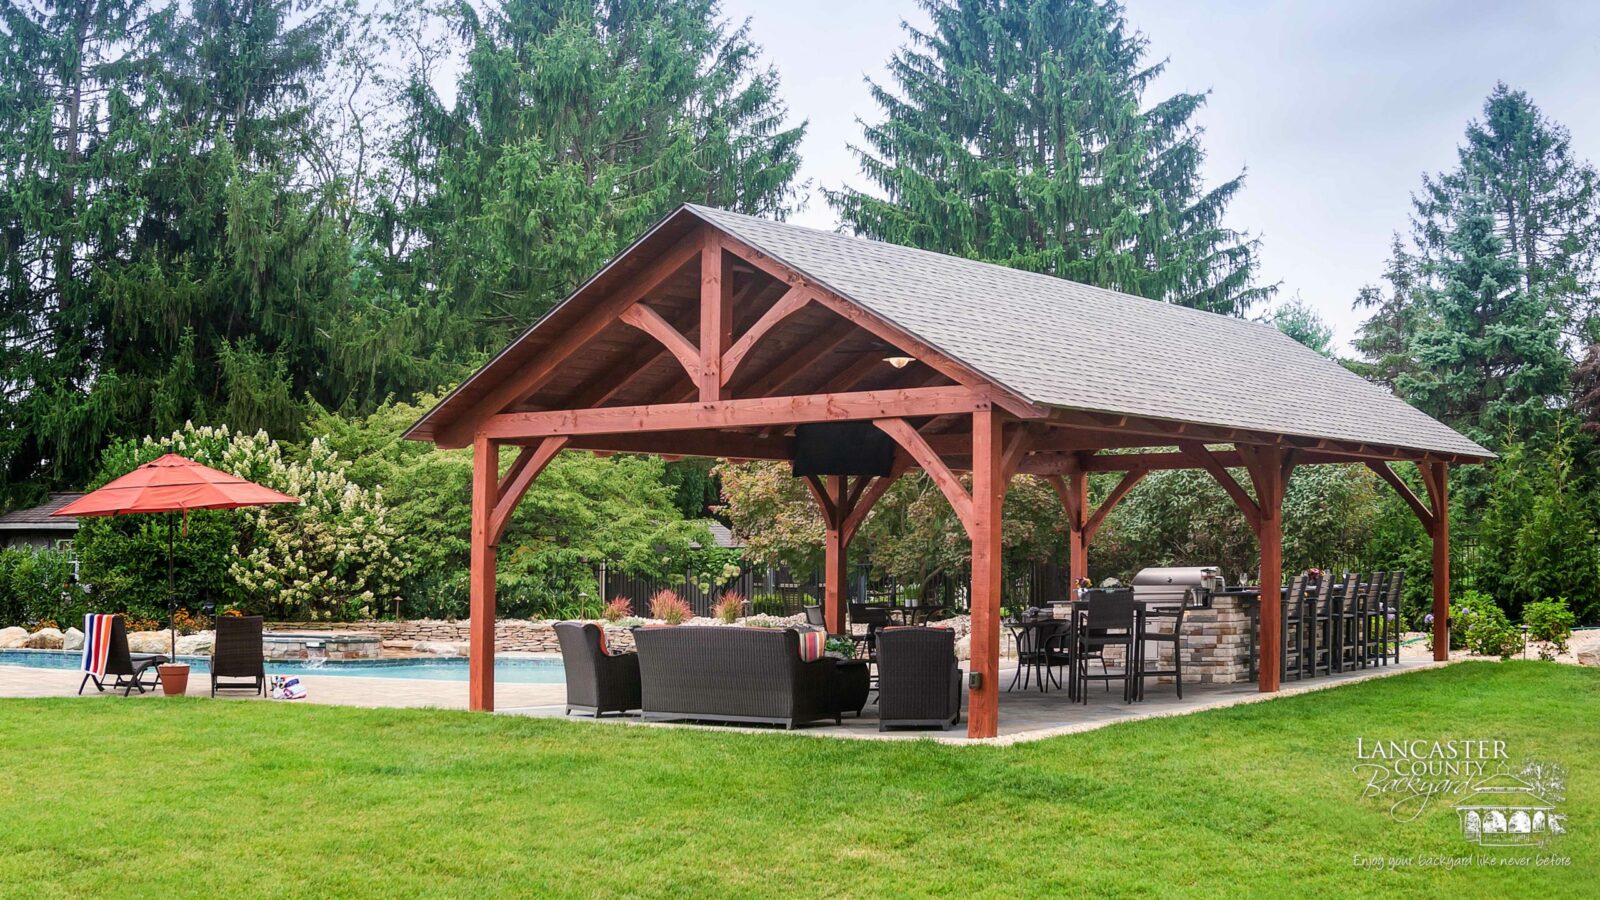 20x40 tim & heather o'connell timber frame pavilion